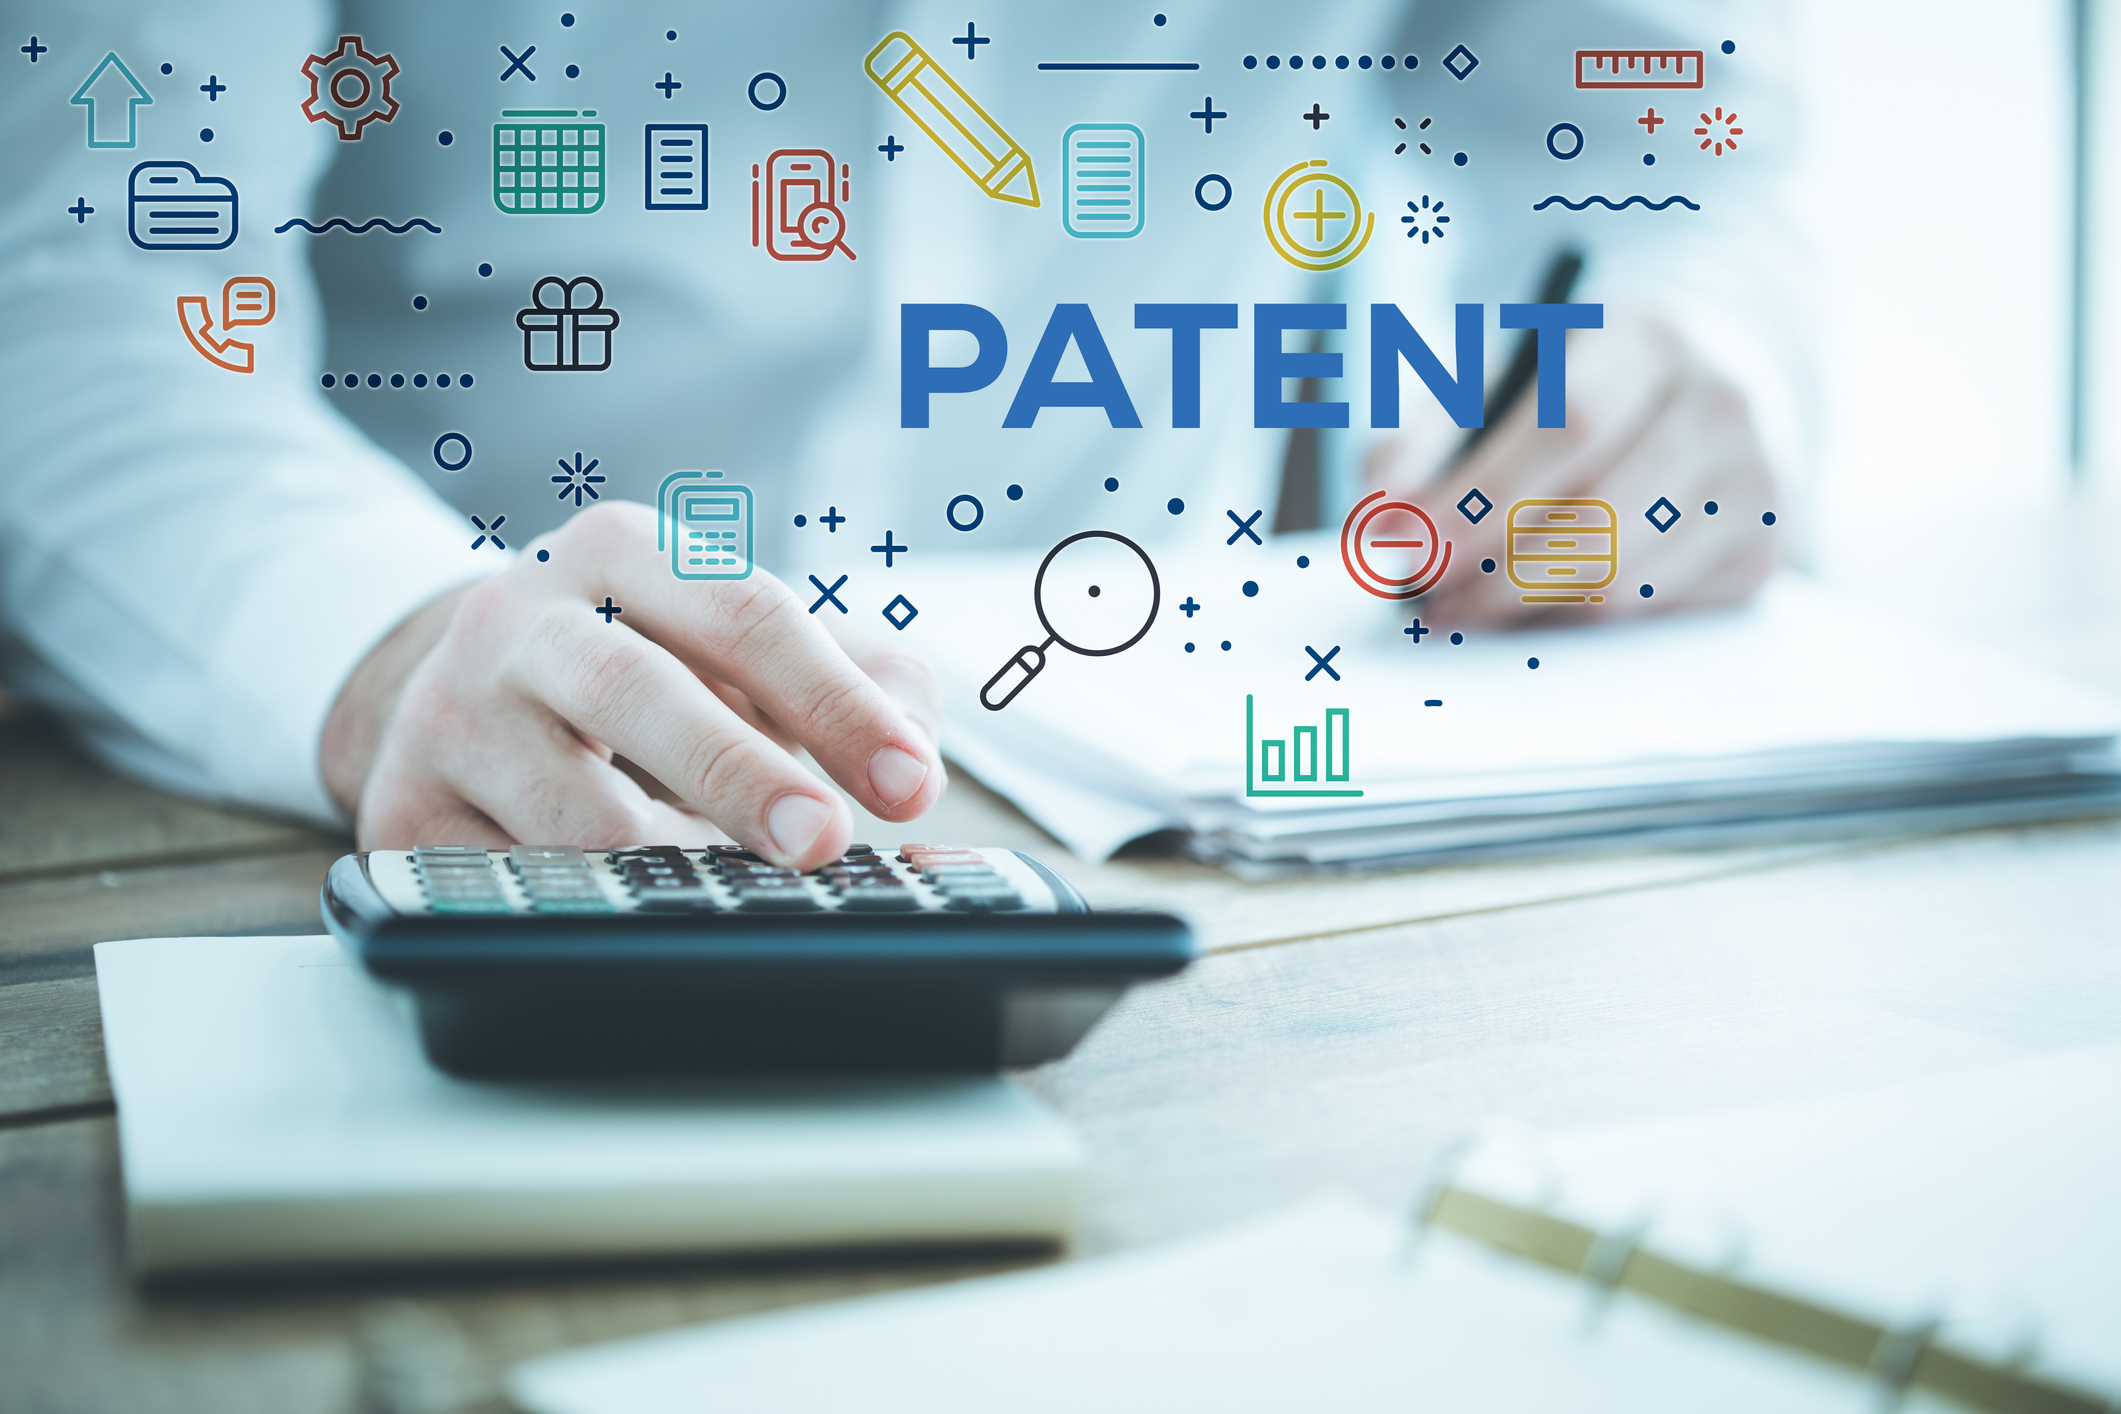 patent assignment transfer